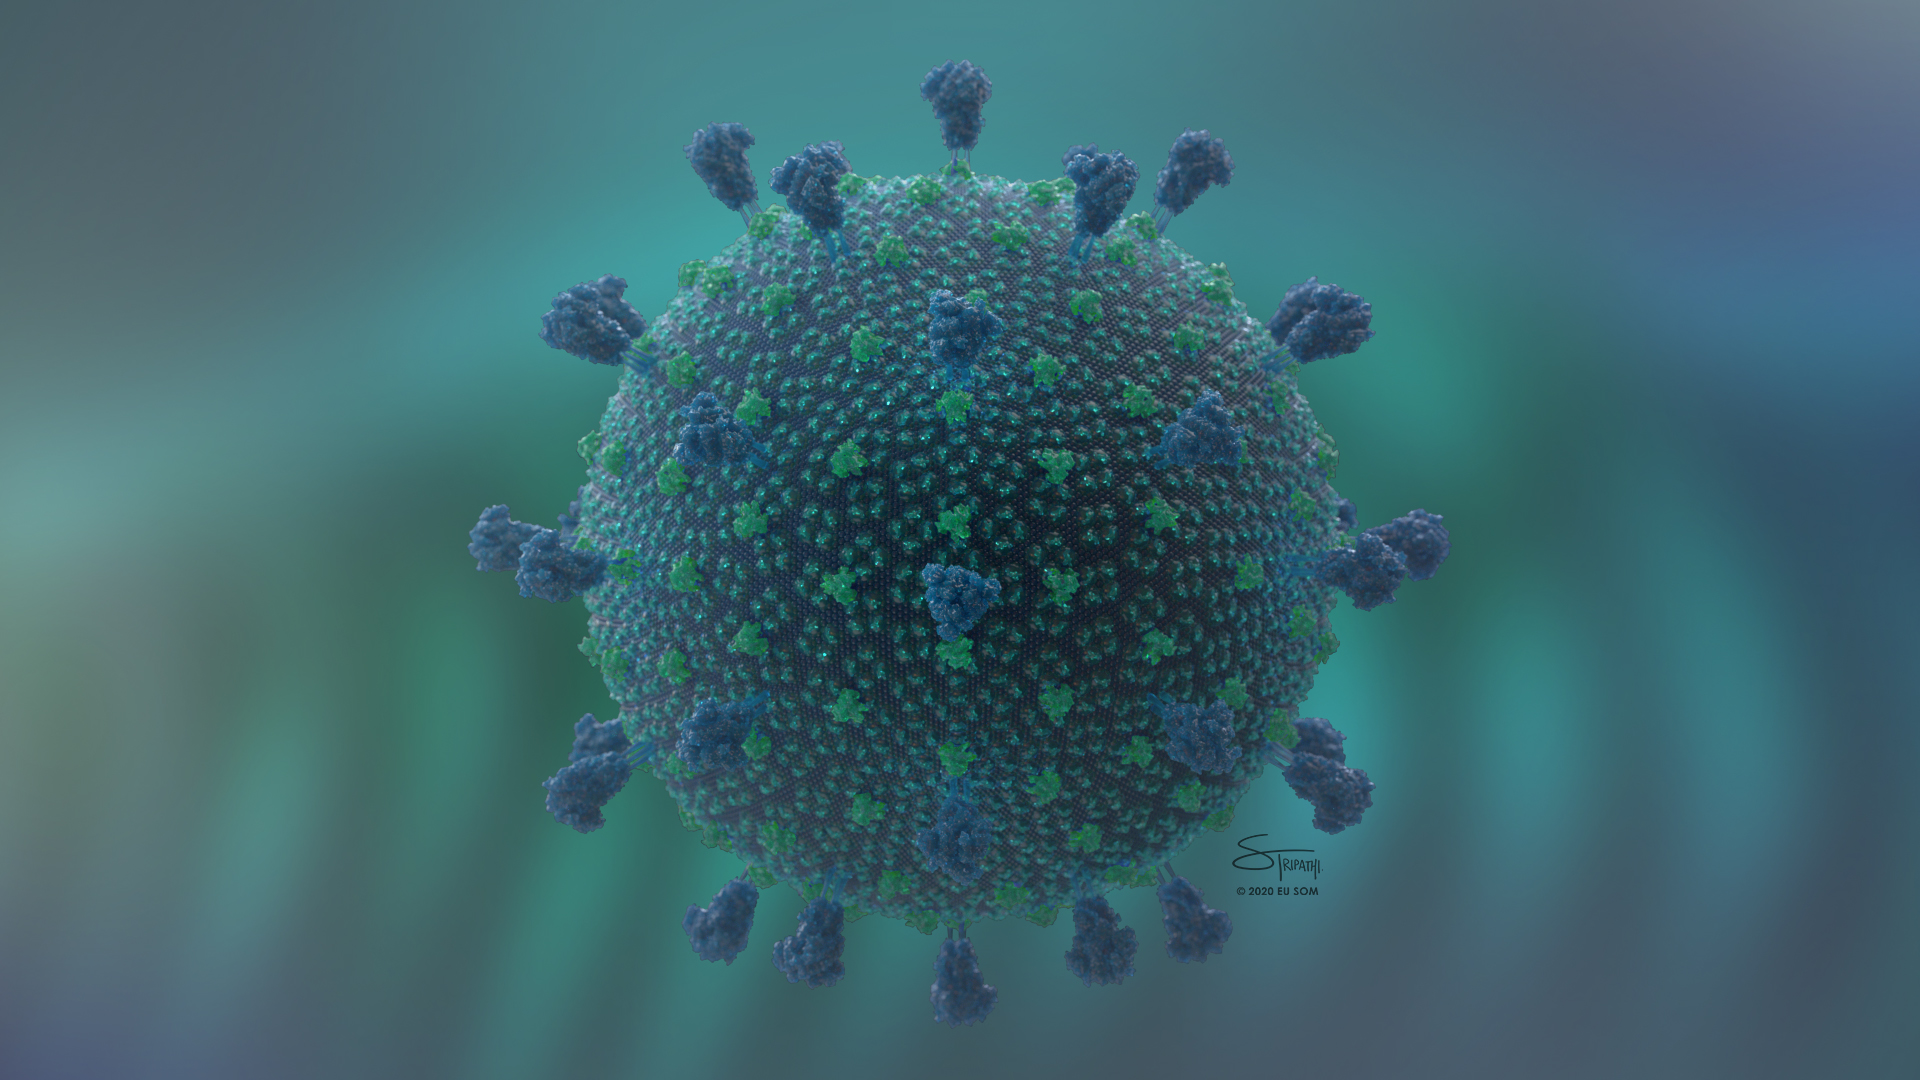 Scientifically accurate illustration of the SARS-CoV-2 virus, including the usrface spike proteins, created by Satyen Tripathi of Emory Univeristy.